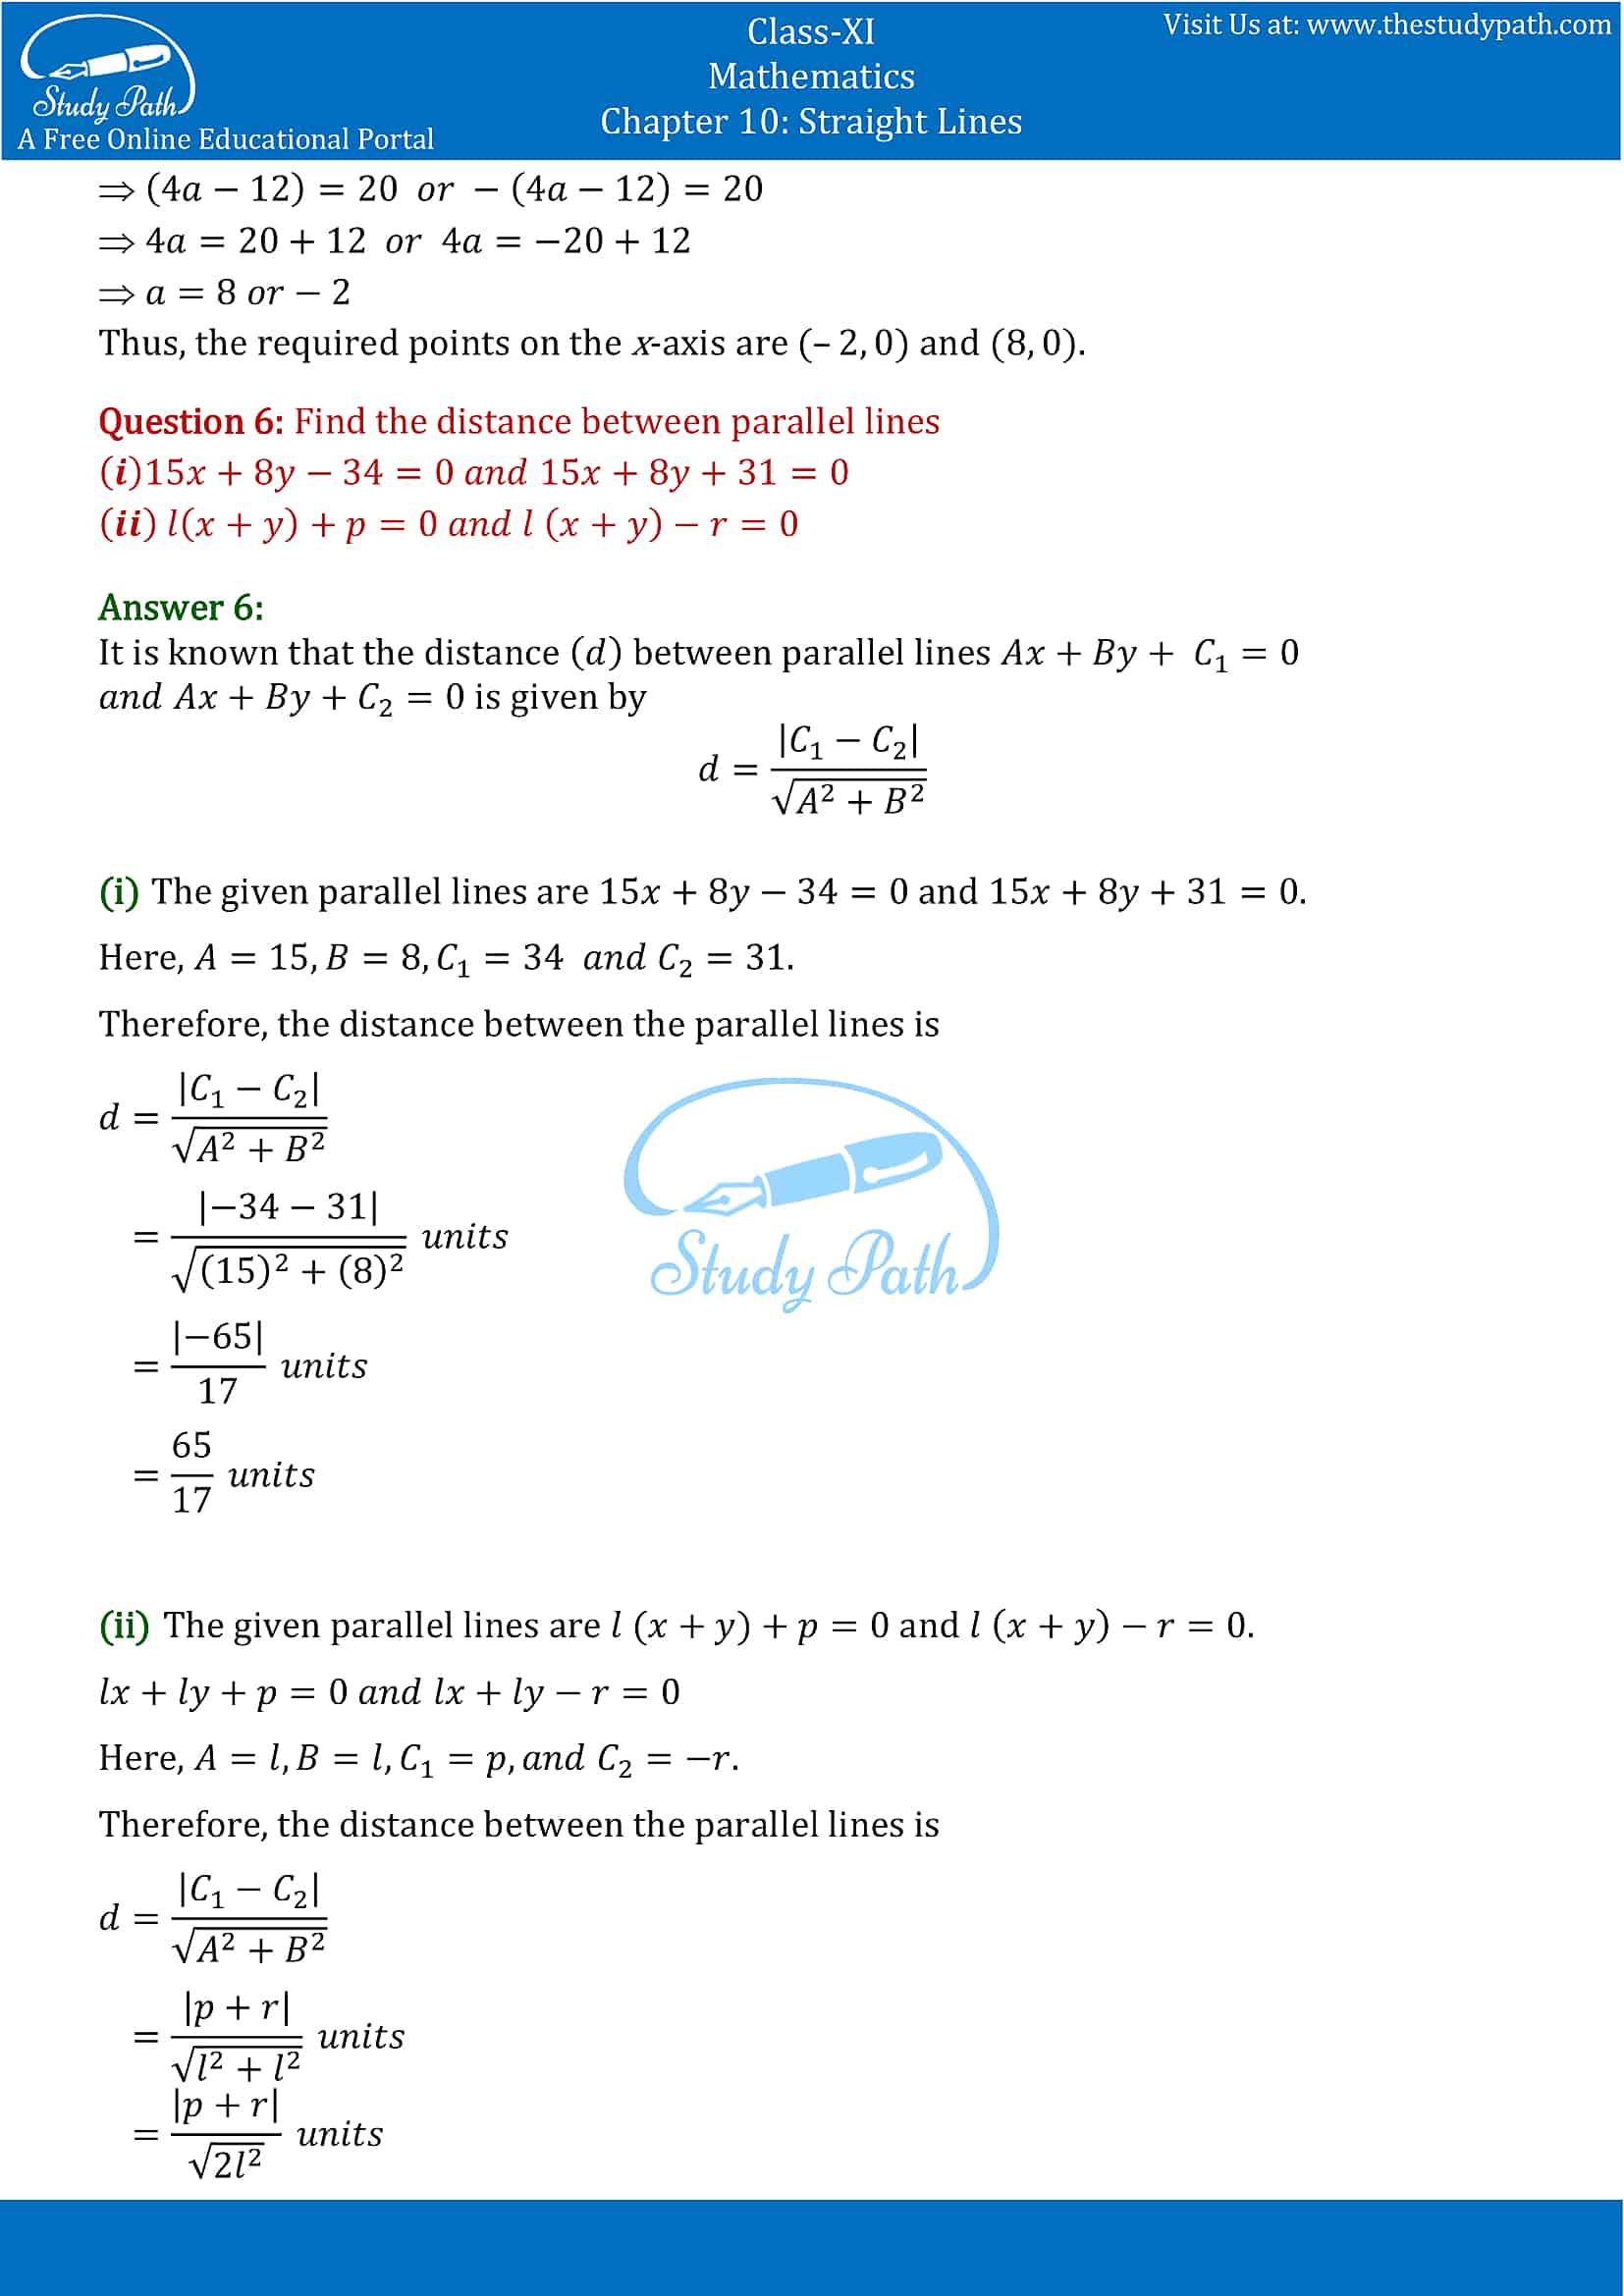 NCERT Solutions for Class 11 Maths chapter 10 Straight Lines Exercise 10.3 part-5